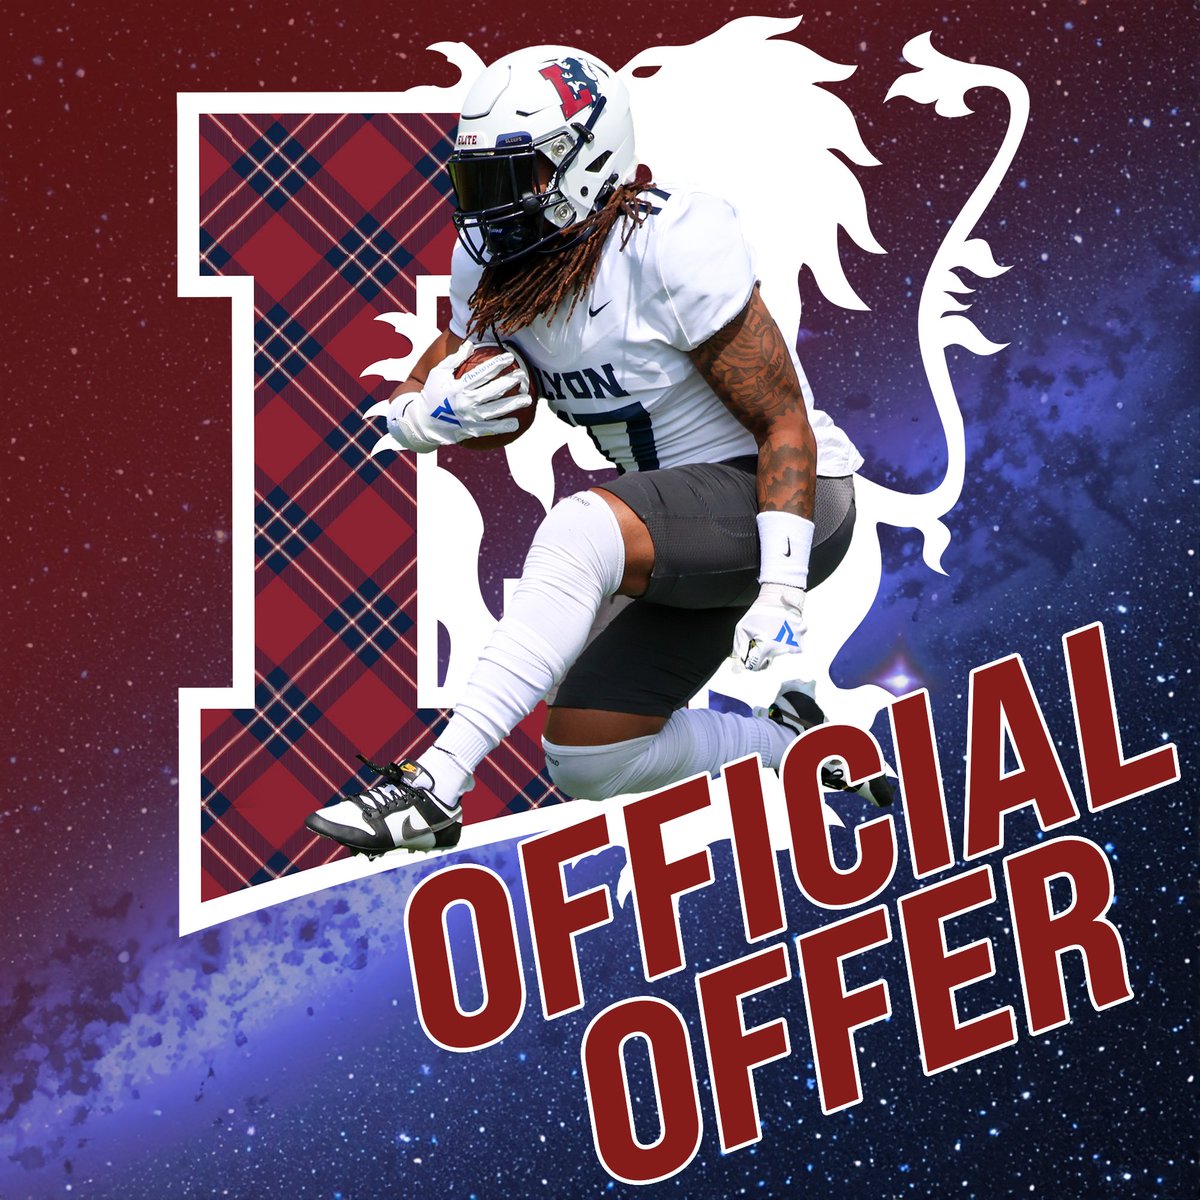 After a great conversation with Coach Douglas (@LyonHBC) and @CoachRFreeland I am proud to say I have received my first offer to @_Lyon_Football‼️@HSAA_Football @CoachMack28 @CalvinLDavis3